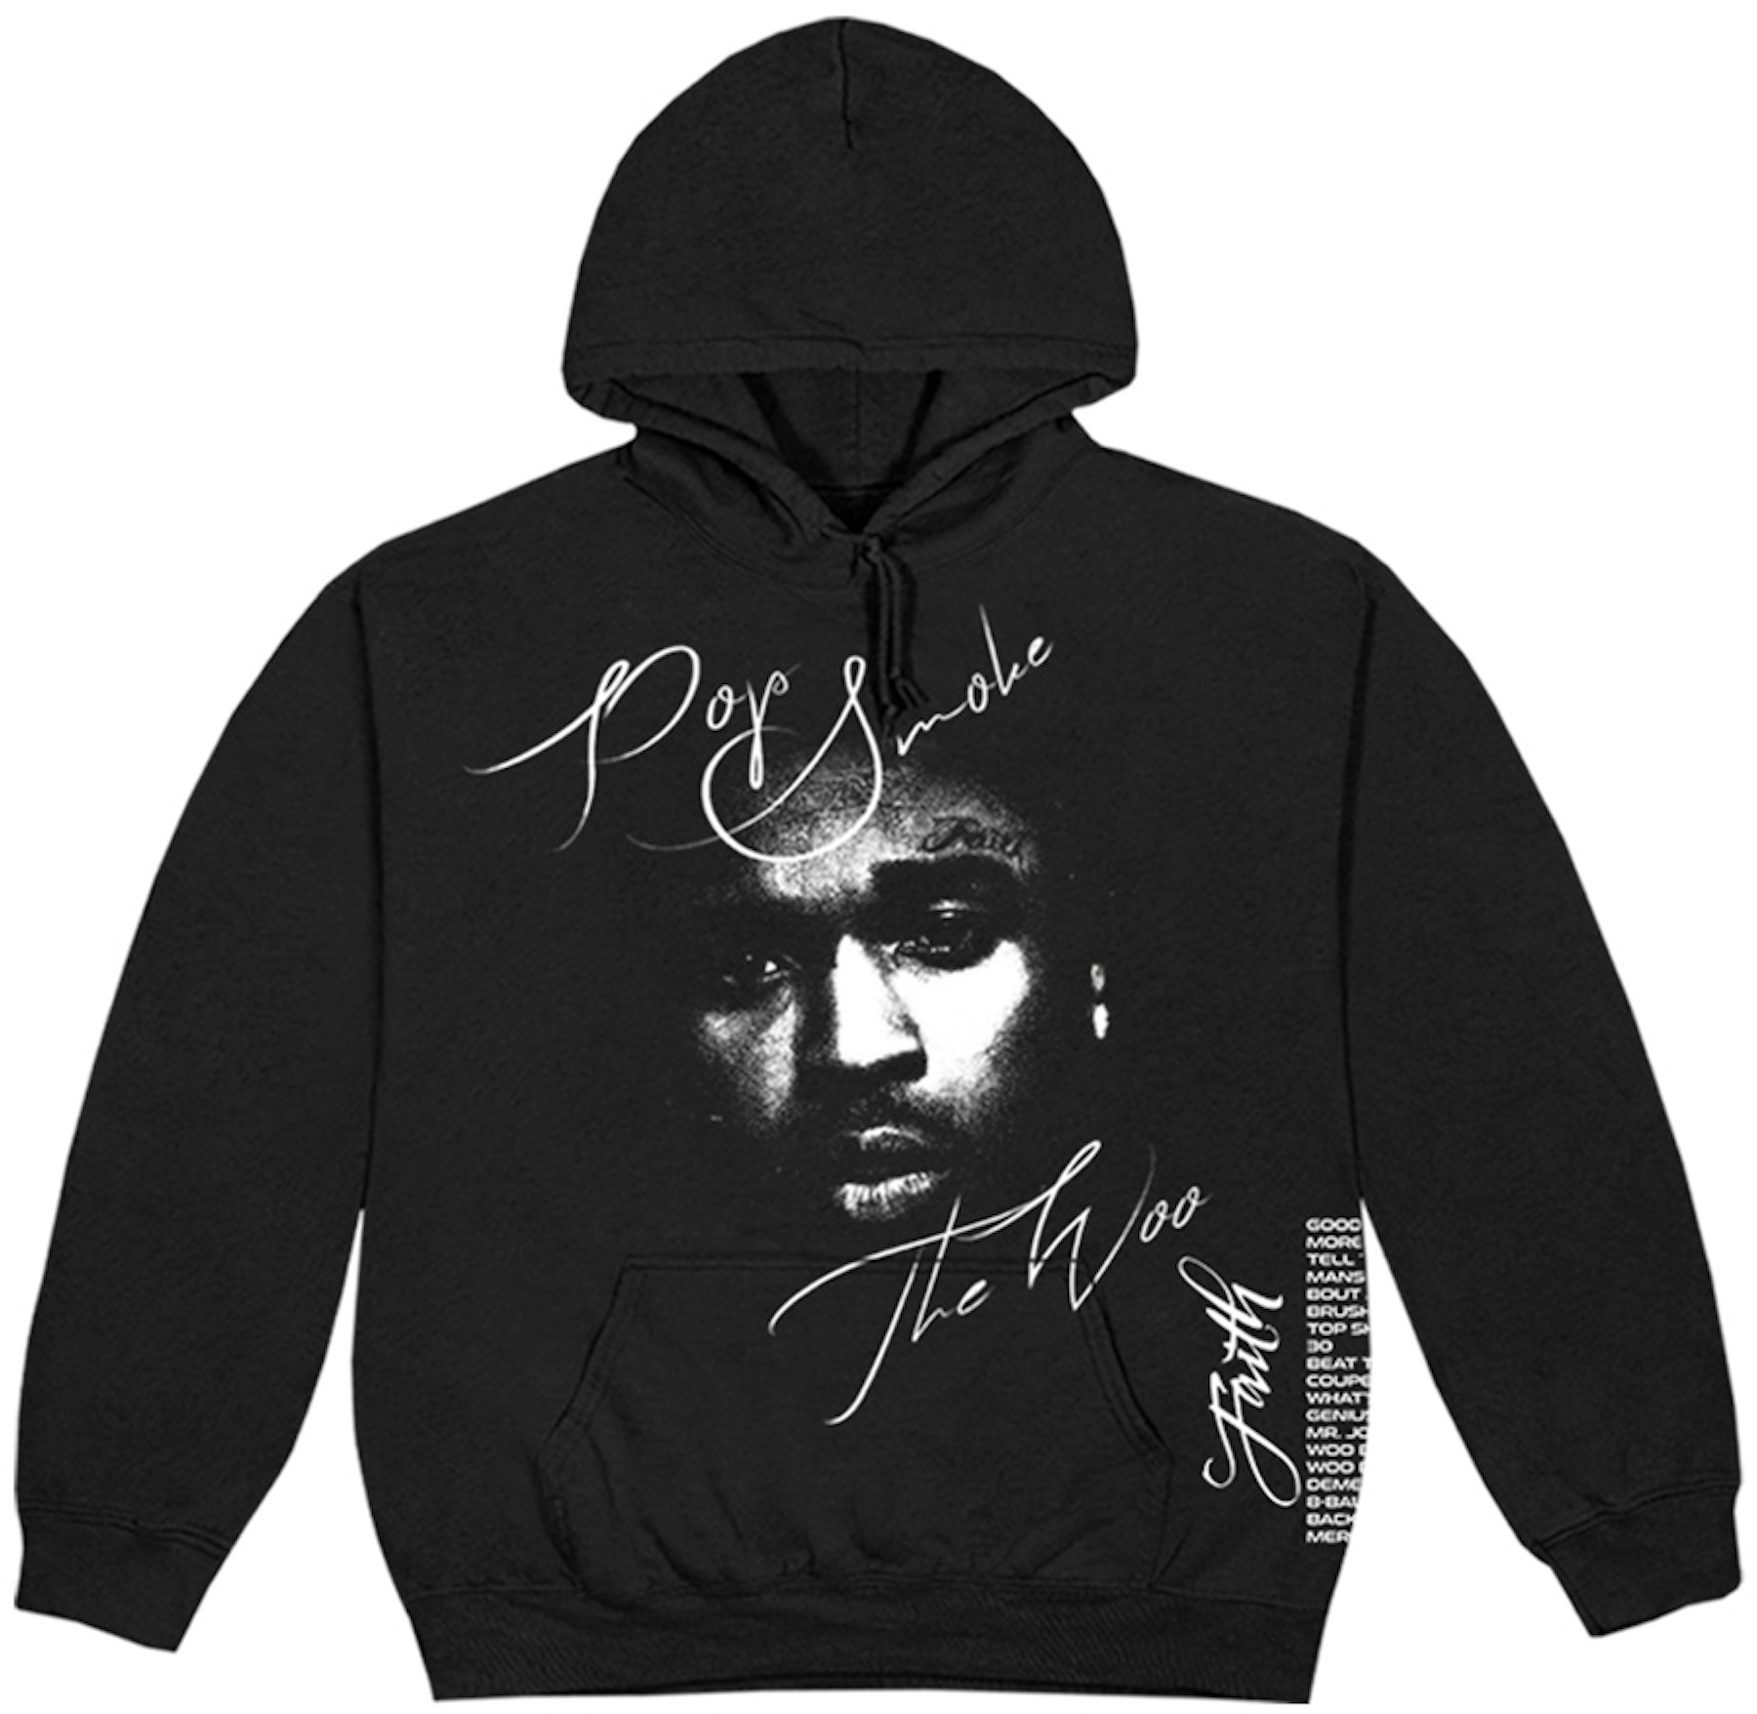 Mega Yacht Good Girls Hoodie Black Size XL - $145 - From Christopher